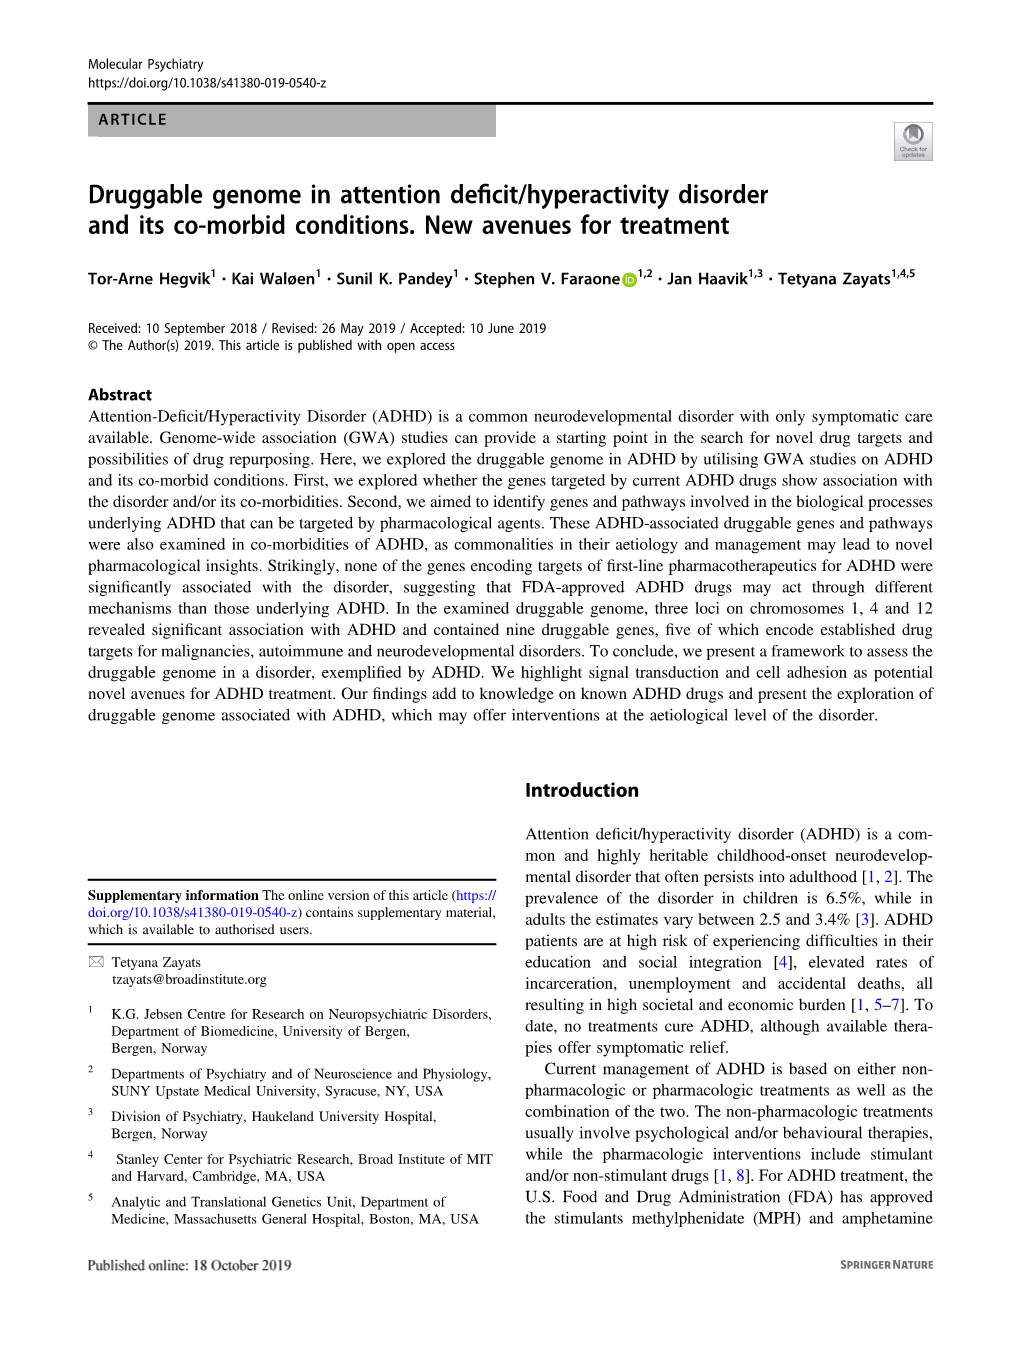 Druggable Genome in Attention Deficit/Hyperactivity Disorder and Its